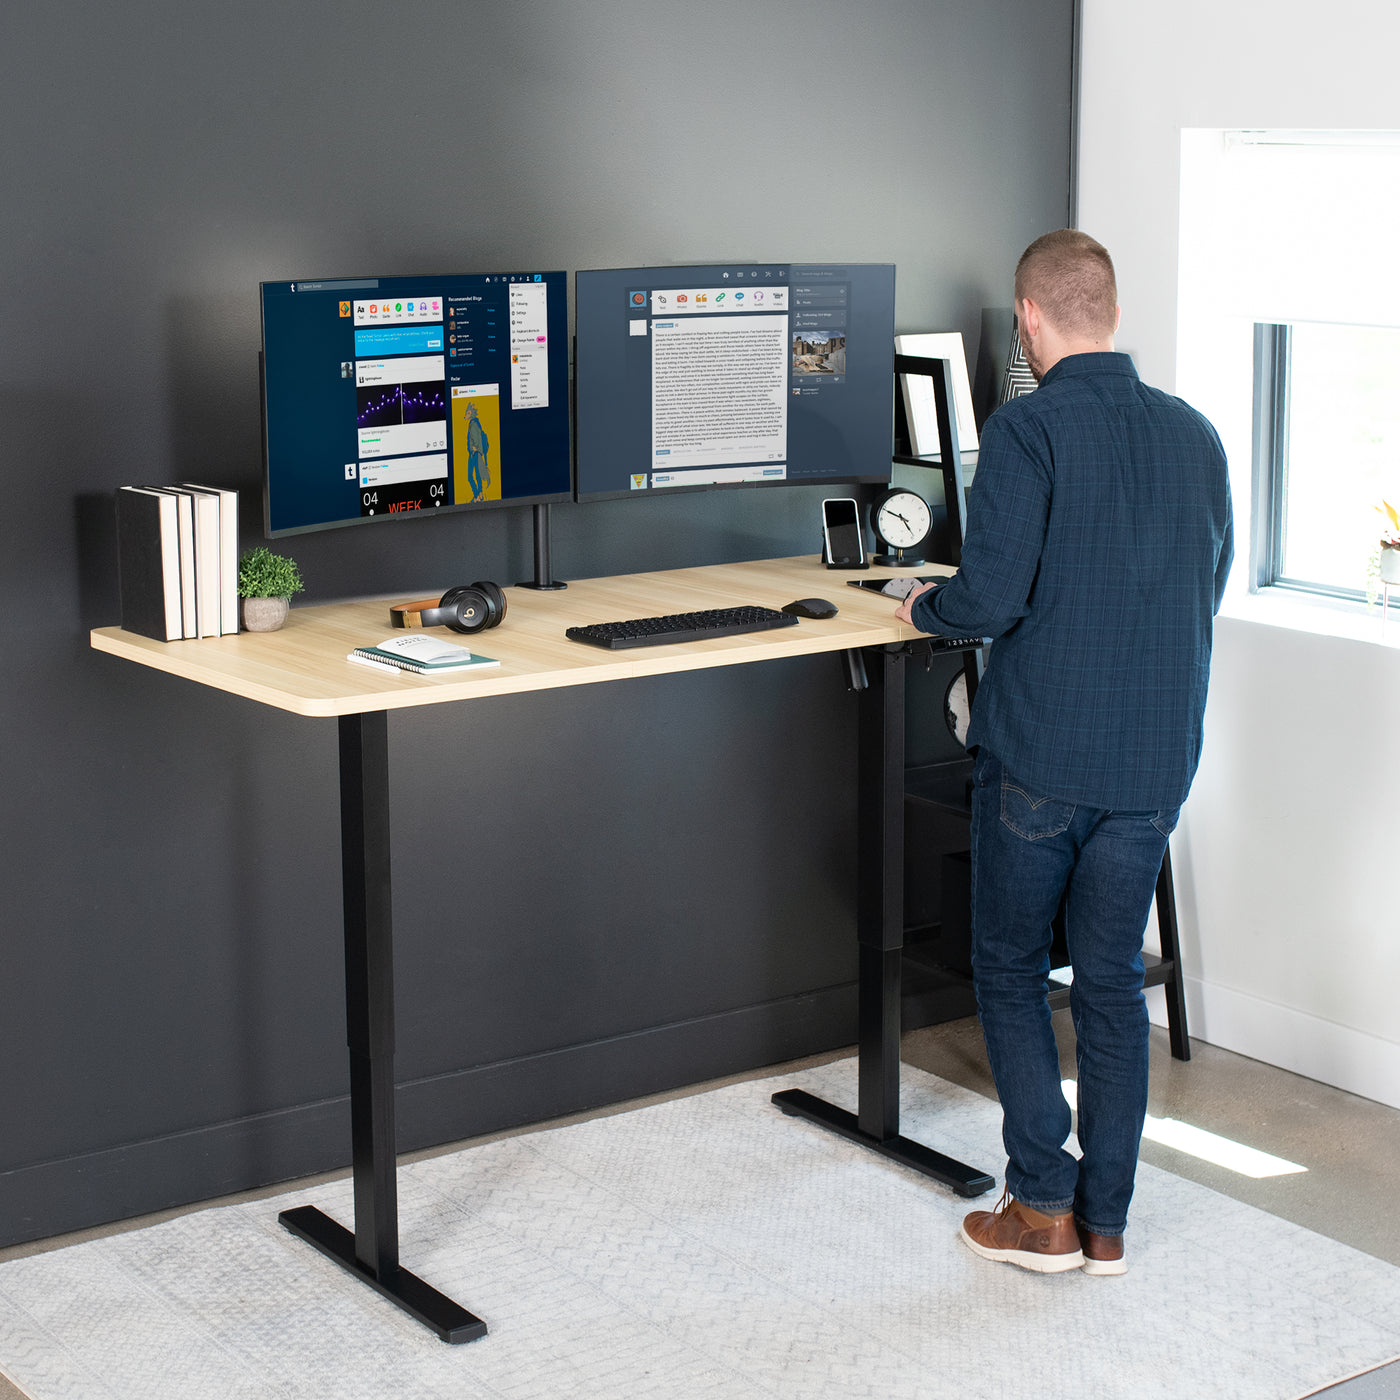 Large sturdy sit or stand active workstation with adjustable height using smart control panel.